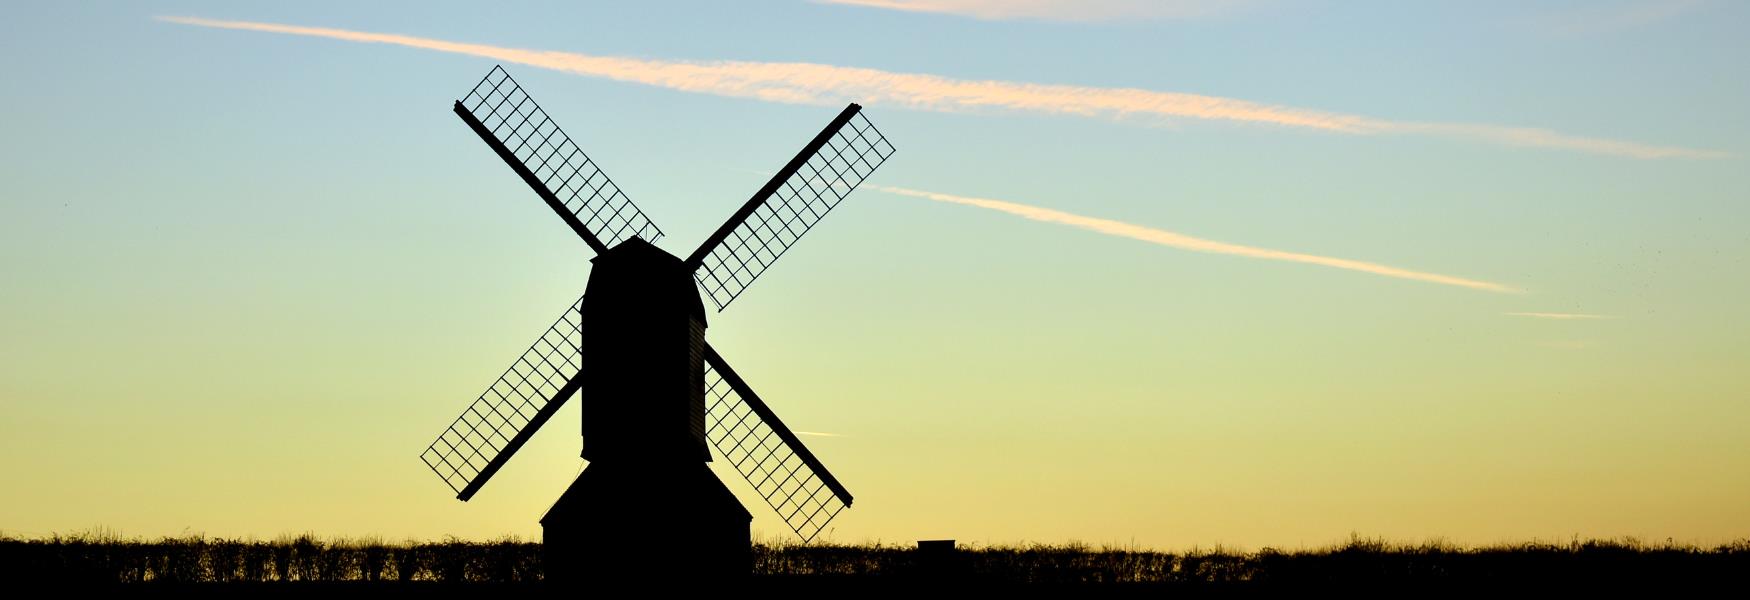 image shows a windmill